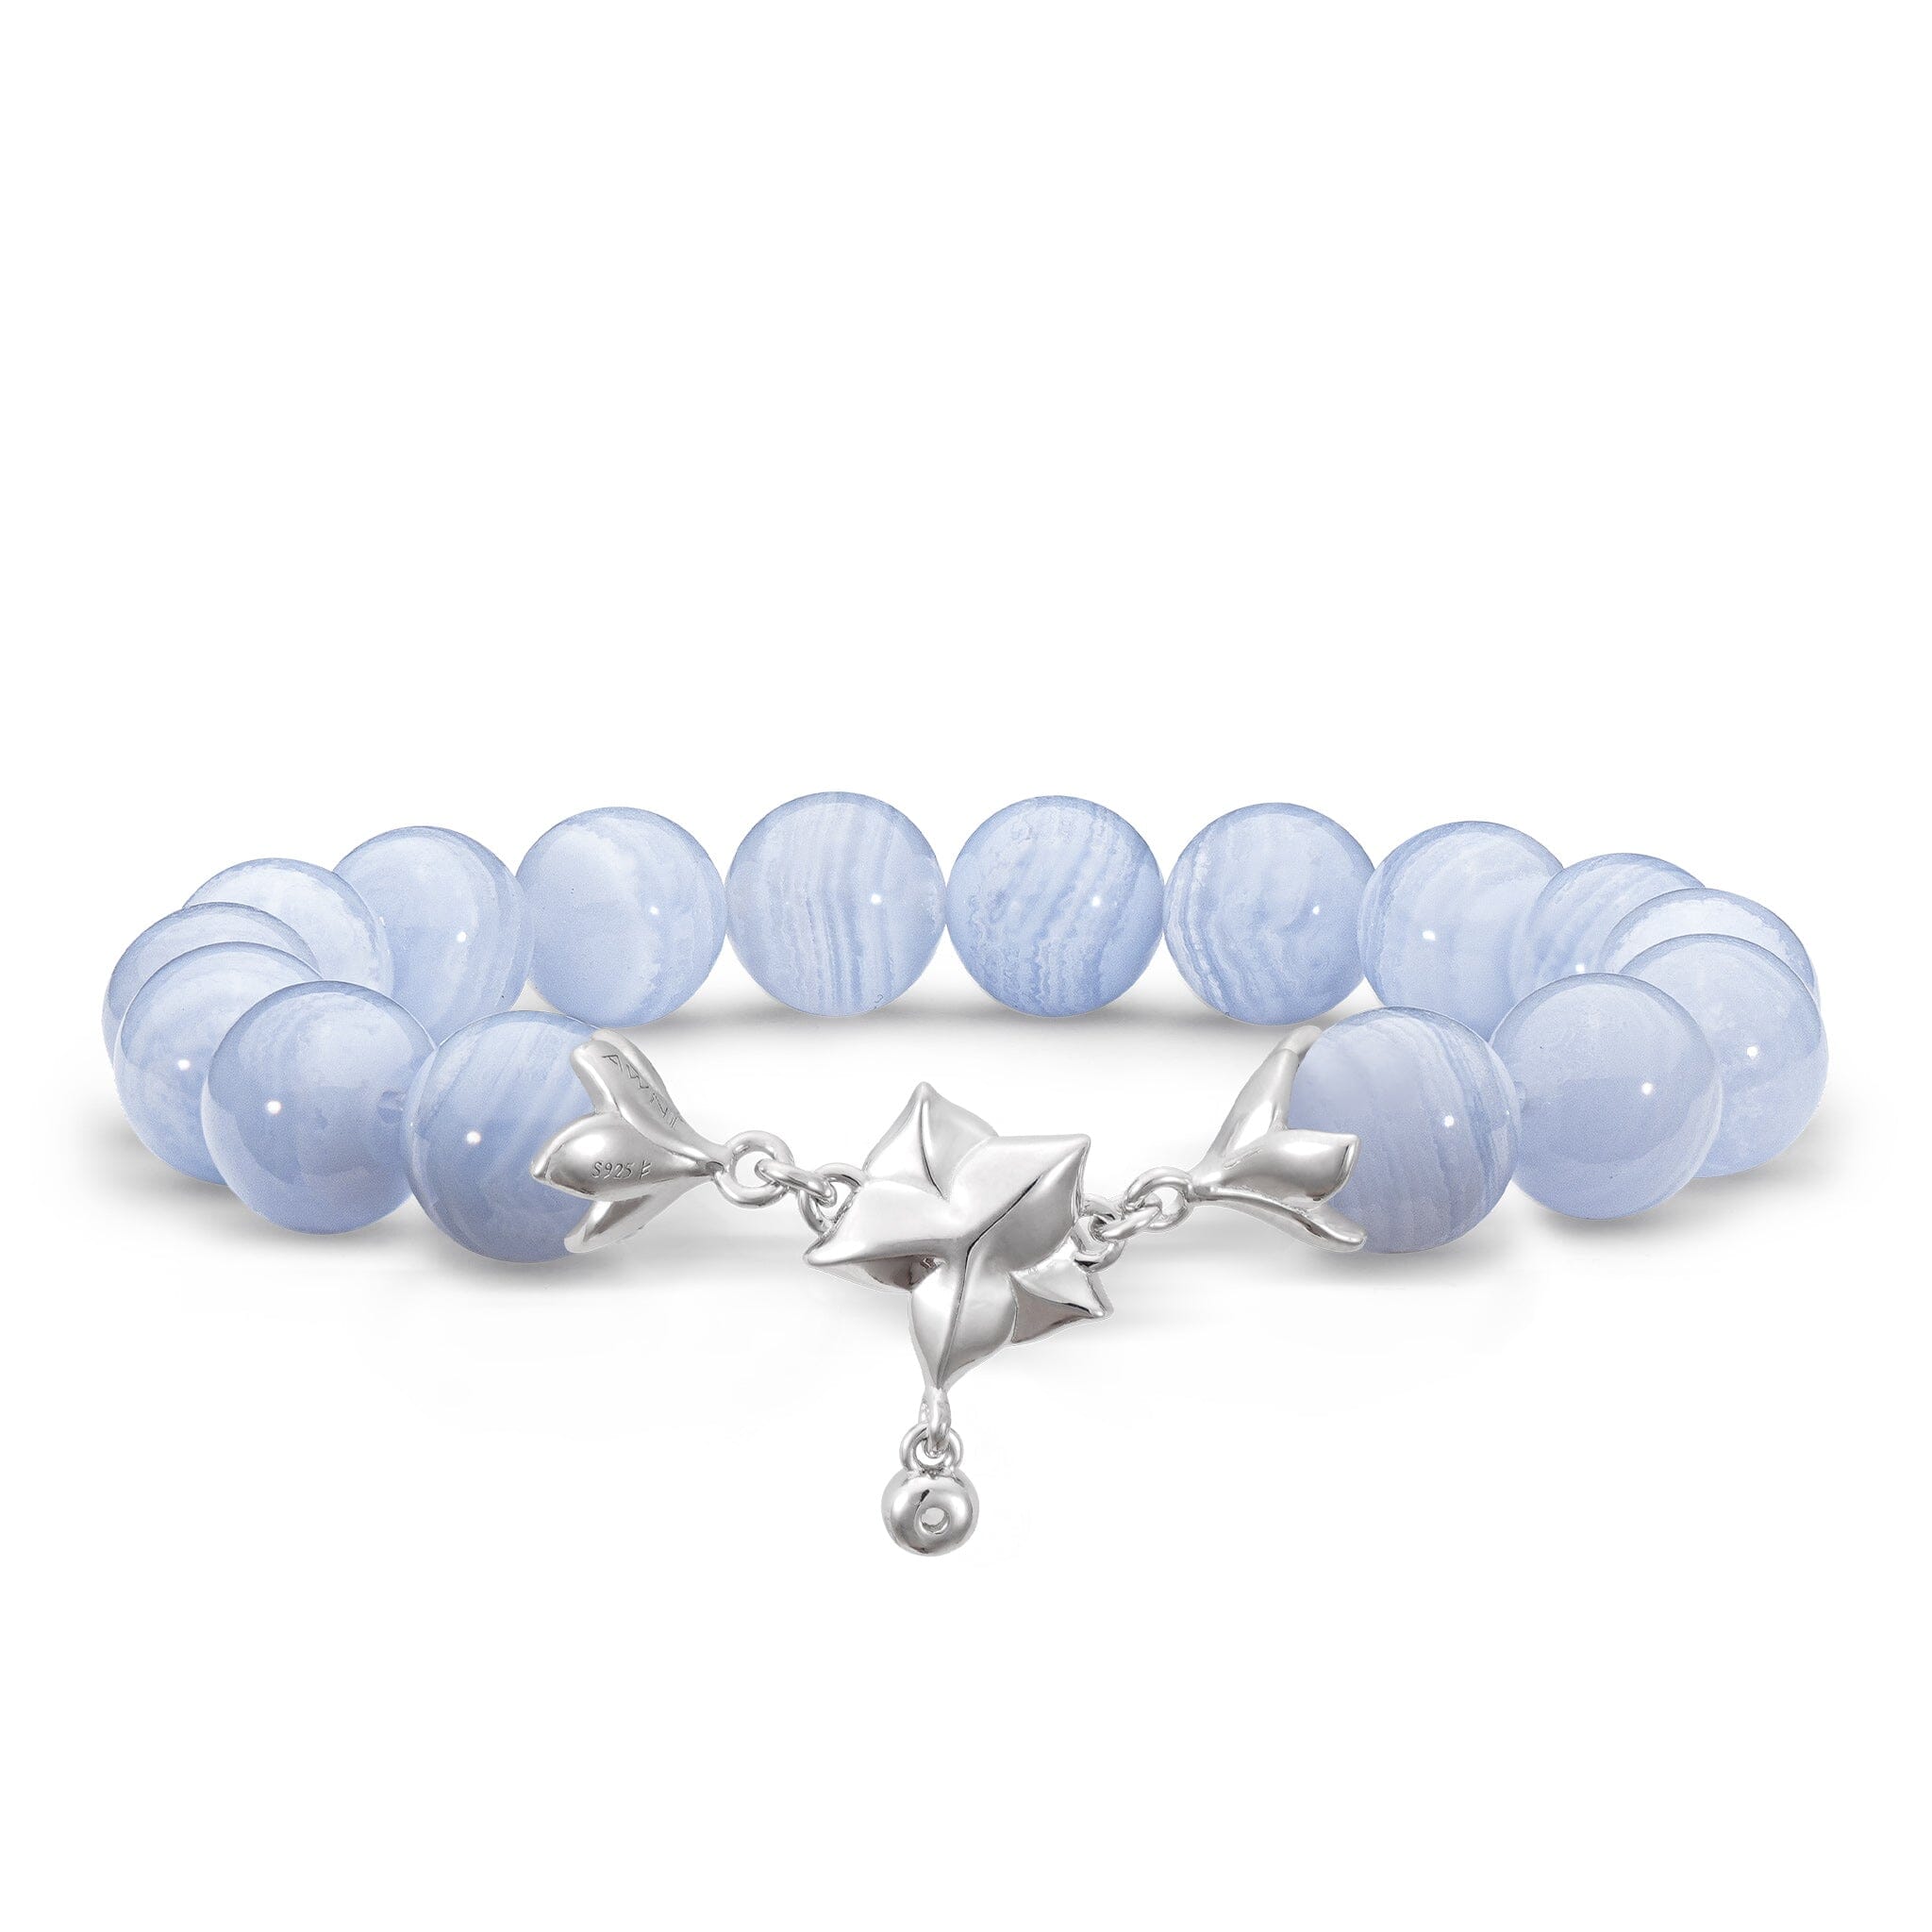 Women's Moth Orchid Charm Beaded Bracelet with Blue Lace Agate Bracelets WAA FASHION GROUP 